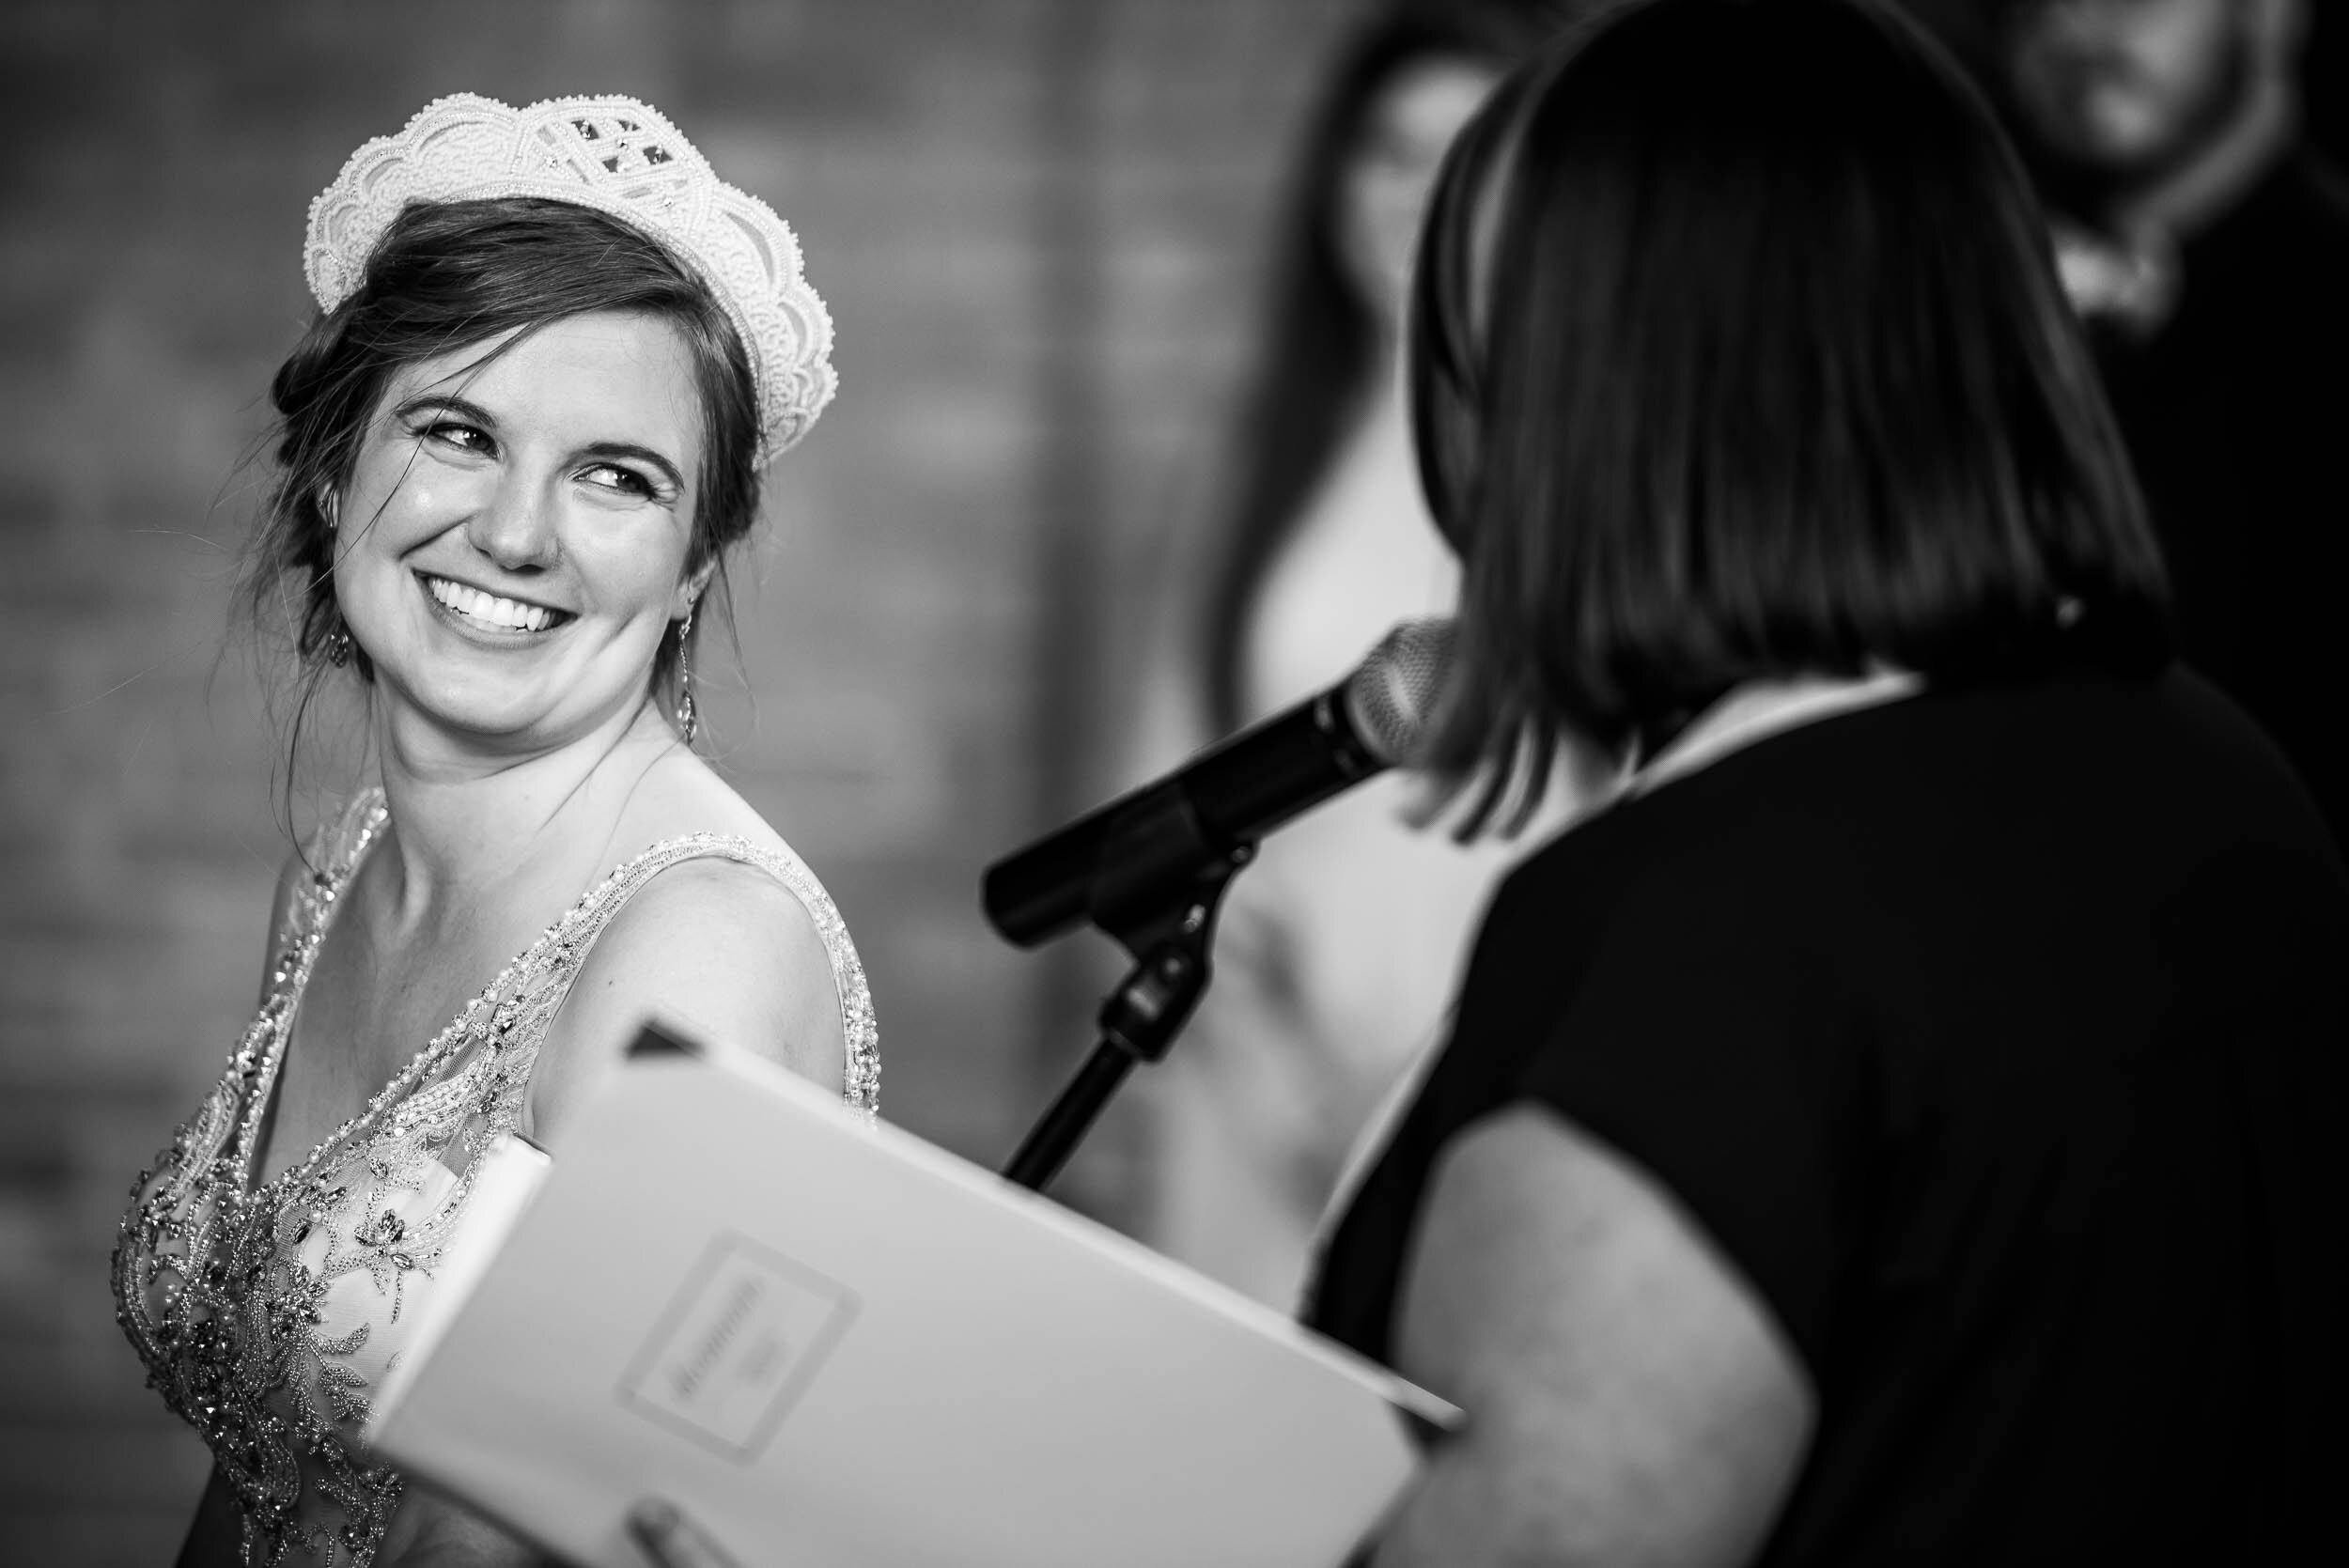 Bride smiles at the officiant and friend during her wedding ceremony: Columbus Park Refectory Chicago wedding captured by J. Brown Photography.